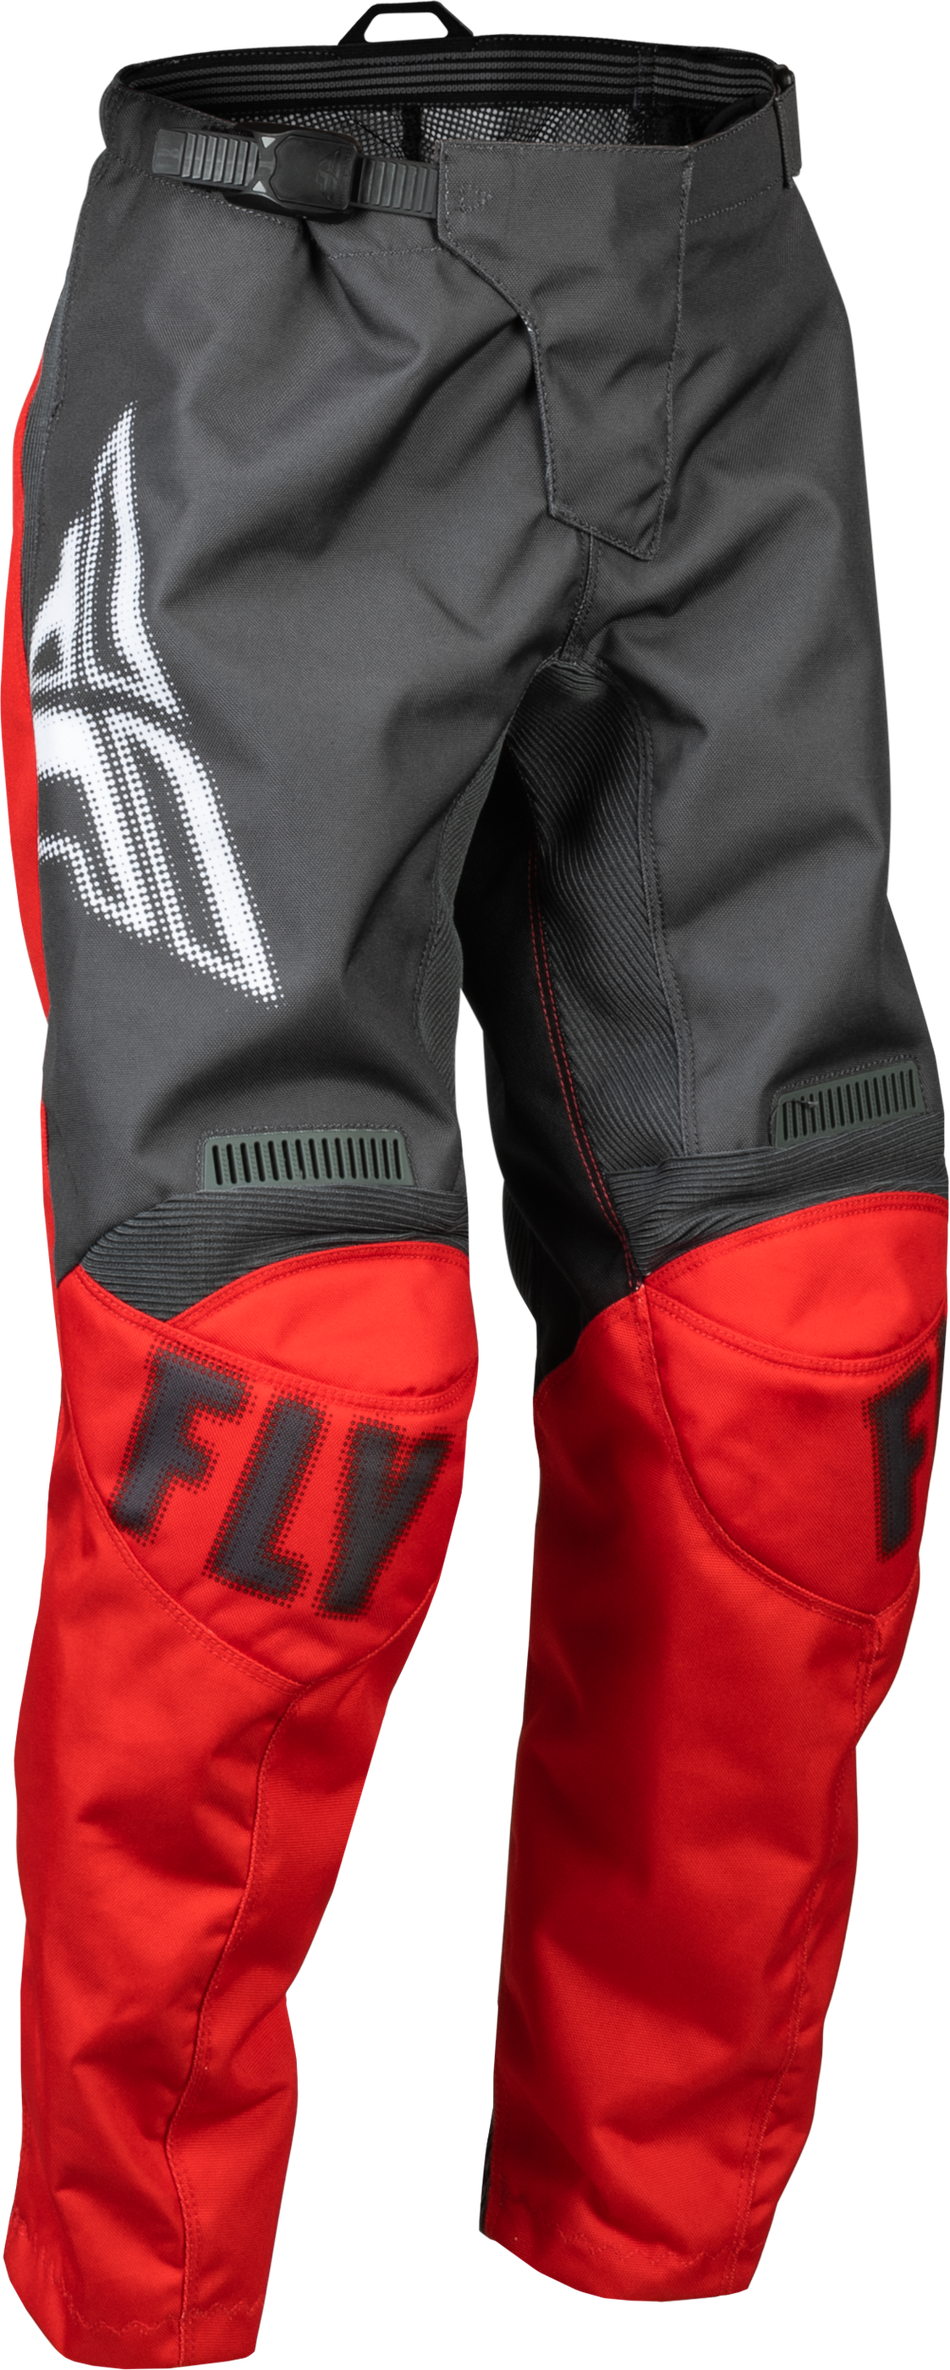 FLY RACING Youth F-16 Pants Grey/Red Sz 24 376-23424